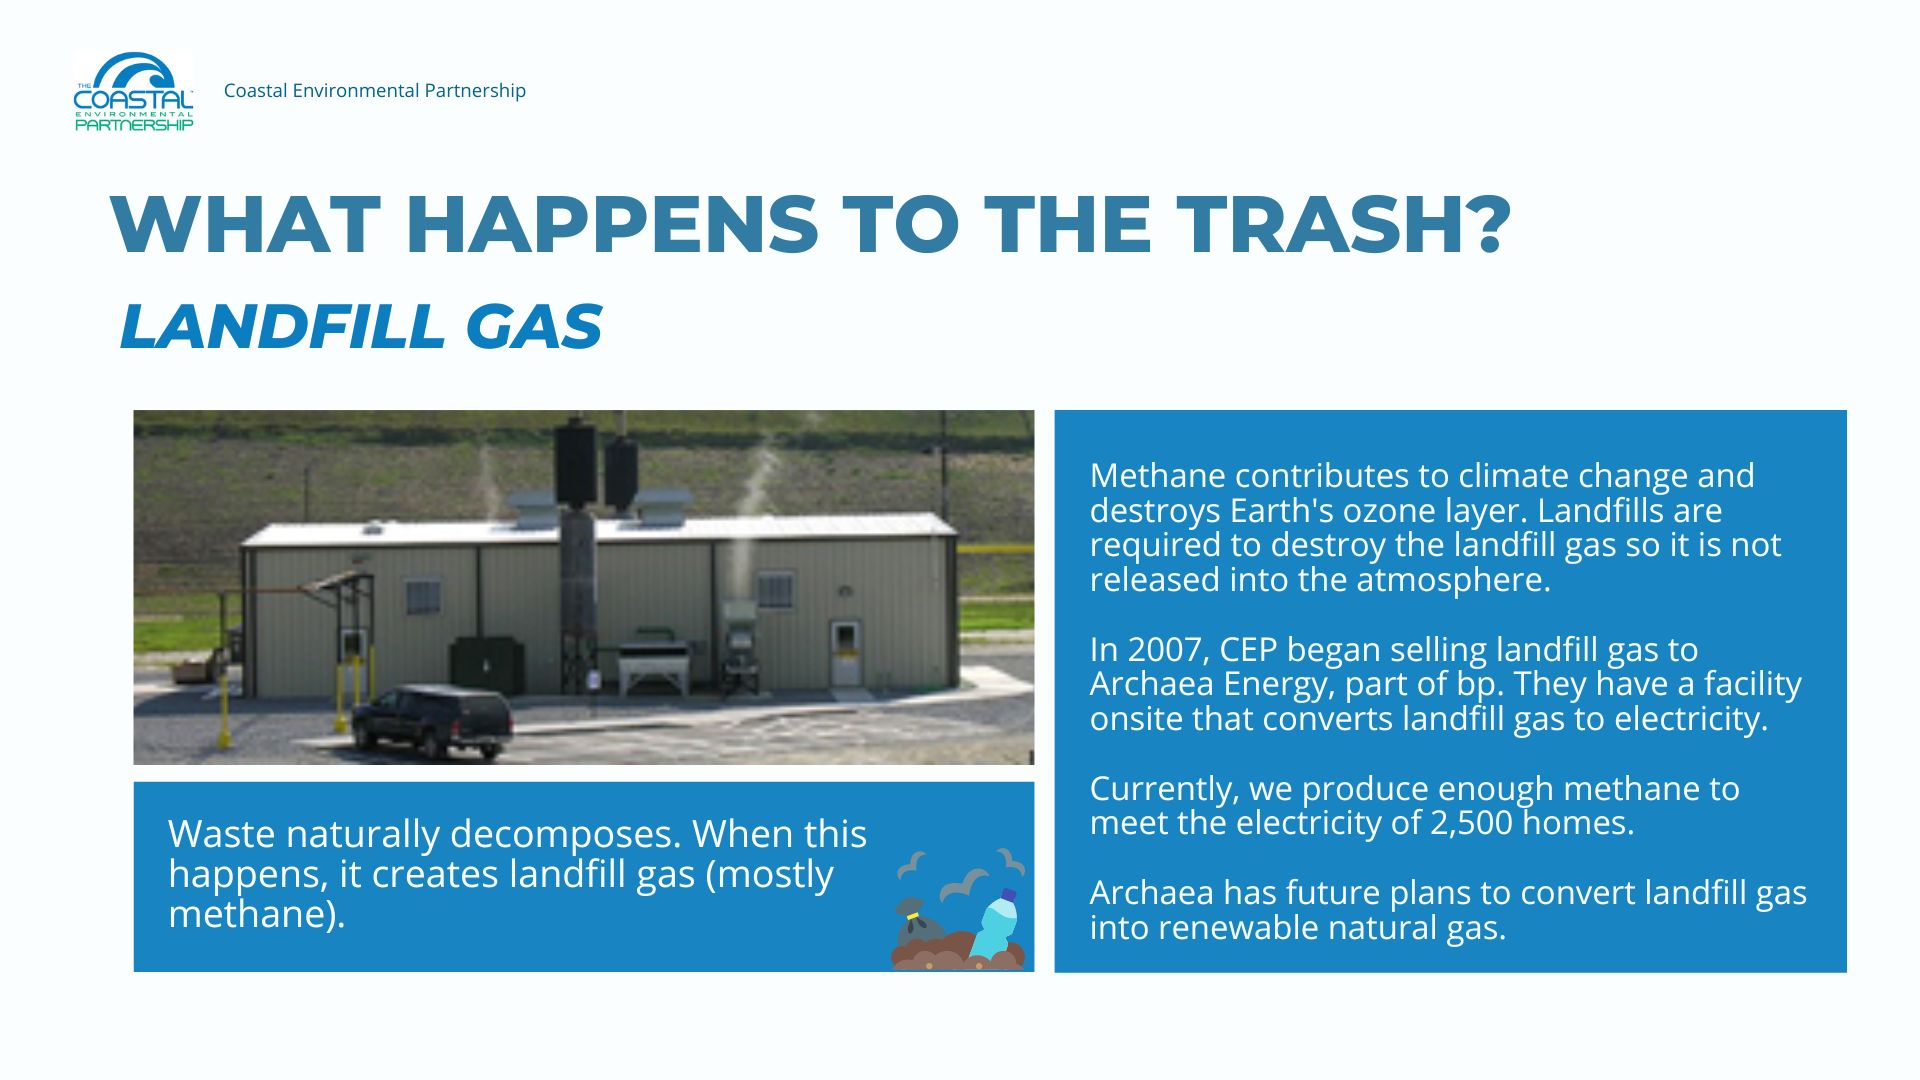 Waste naturally decomposes. When this happens, it creates landfill gas (mostly methane). Methane contributes to climate change and destroys Earth's ozone layers. Landfills are required to destroy the landfill gas so it is not released into the atmosphere. CEP sells landfill gas to Archaea Energy, who then converts to electricity. There are future plans for Archaea to convert landfill gas into renewable natural gas (RNG).